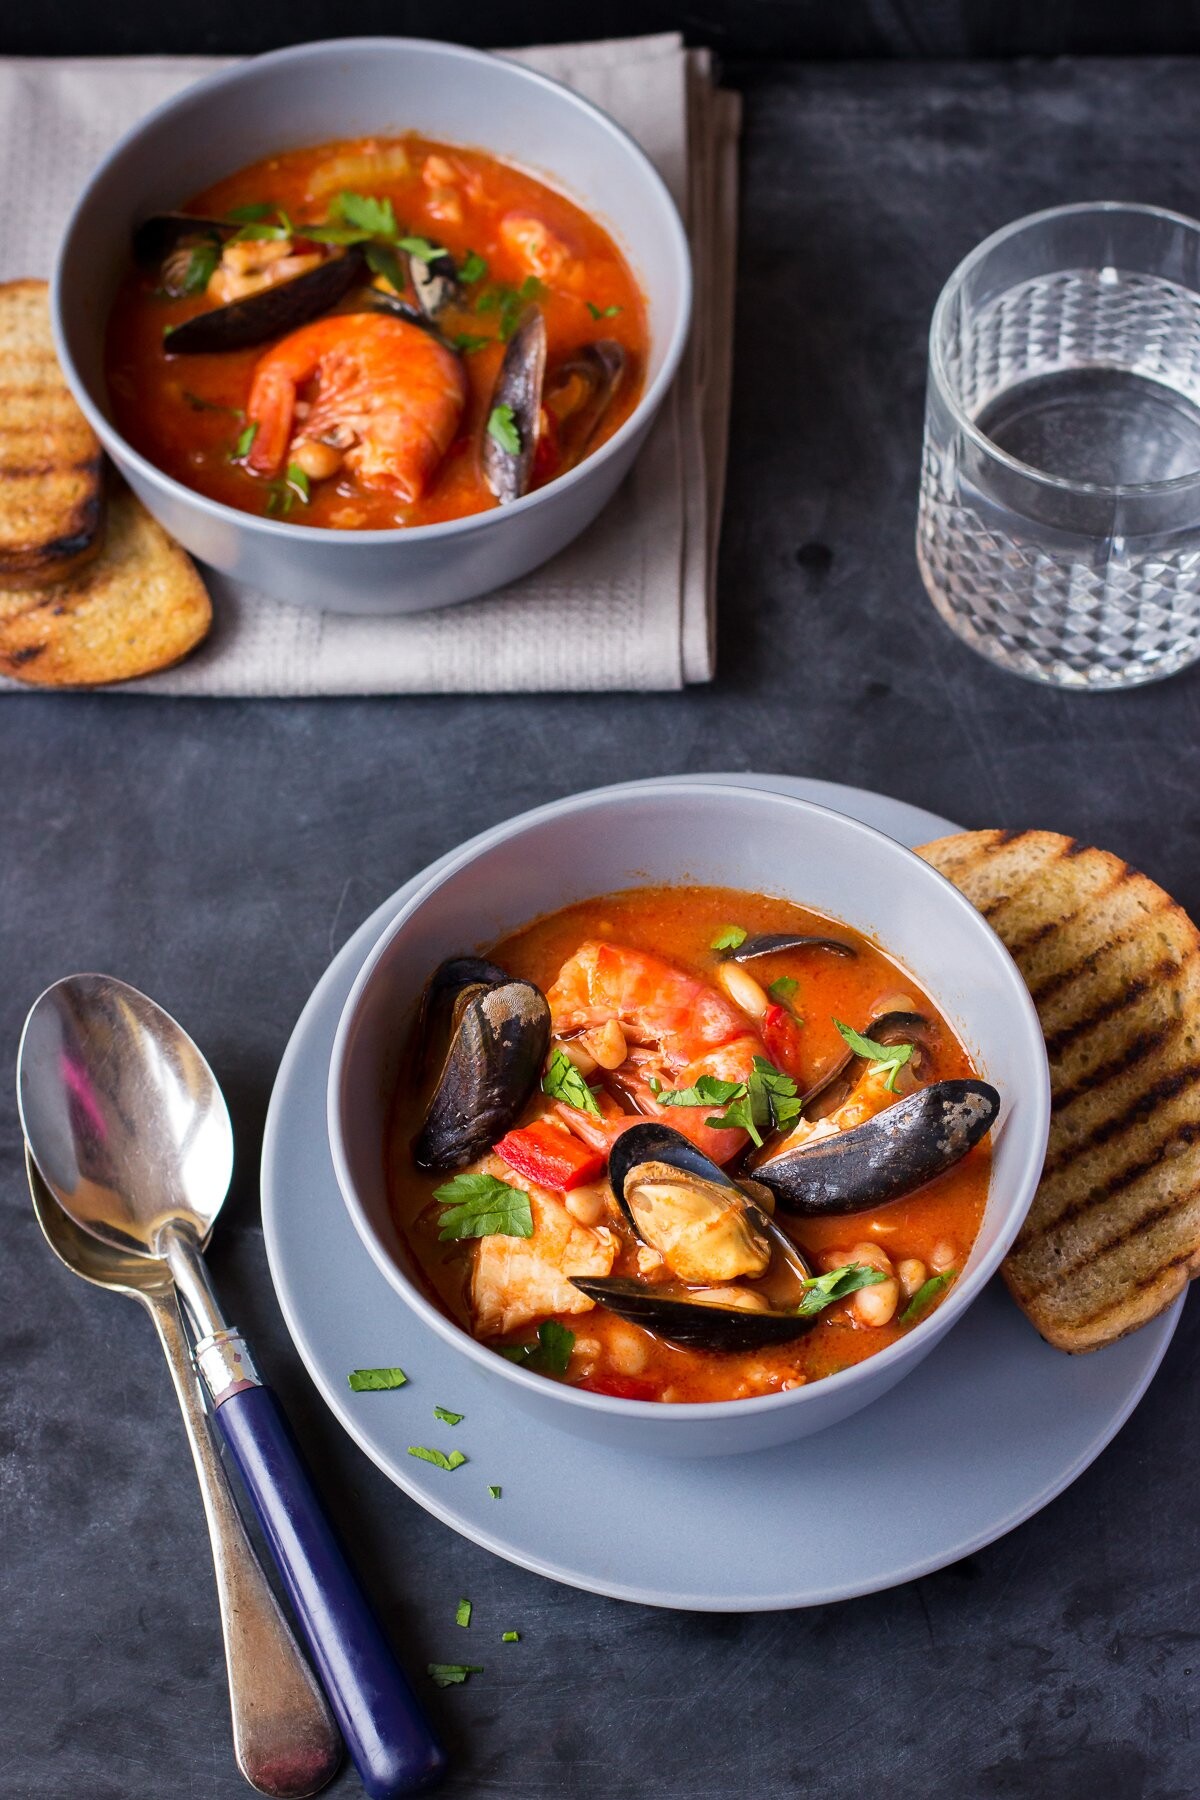 This is a photo of a simple fish and seafood soup made according to an italian recipe with cannellini beans and tomatoes. I made it for my husband who is a huge fan of all seafood dishes.